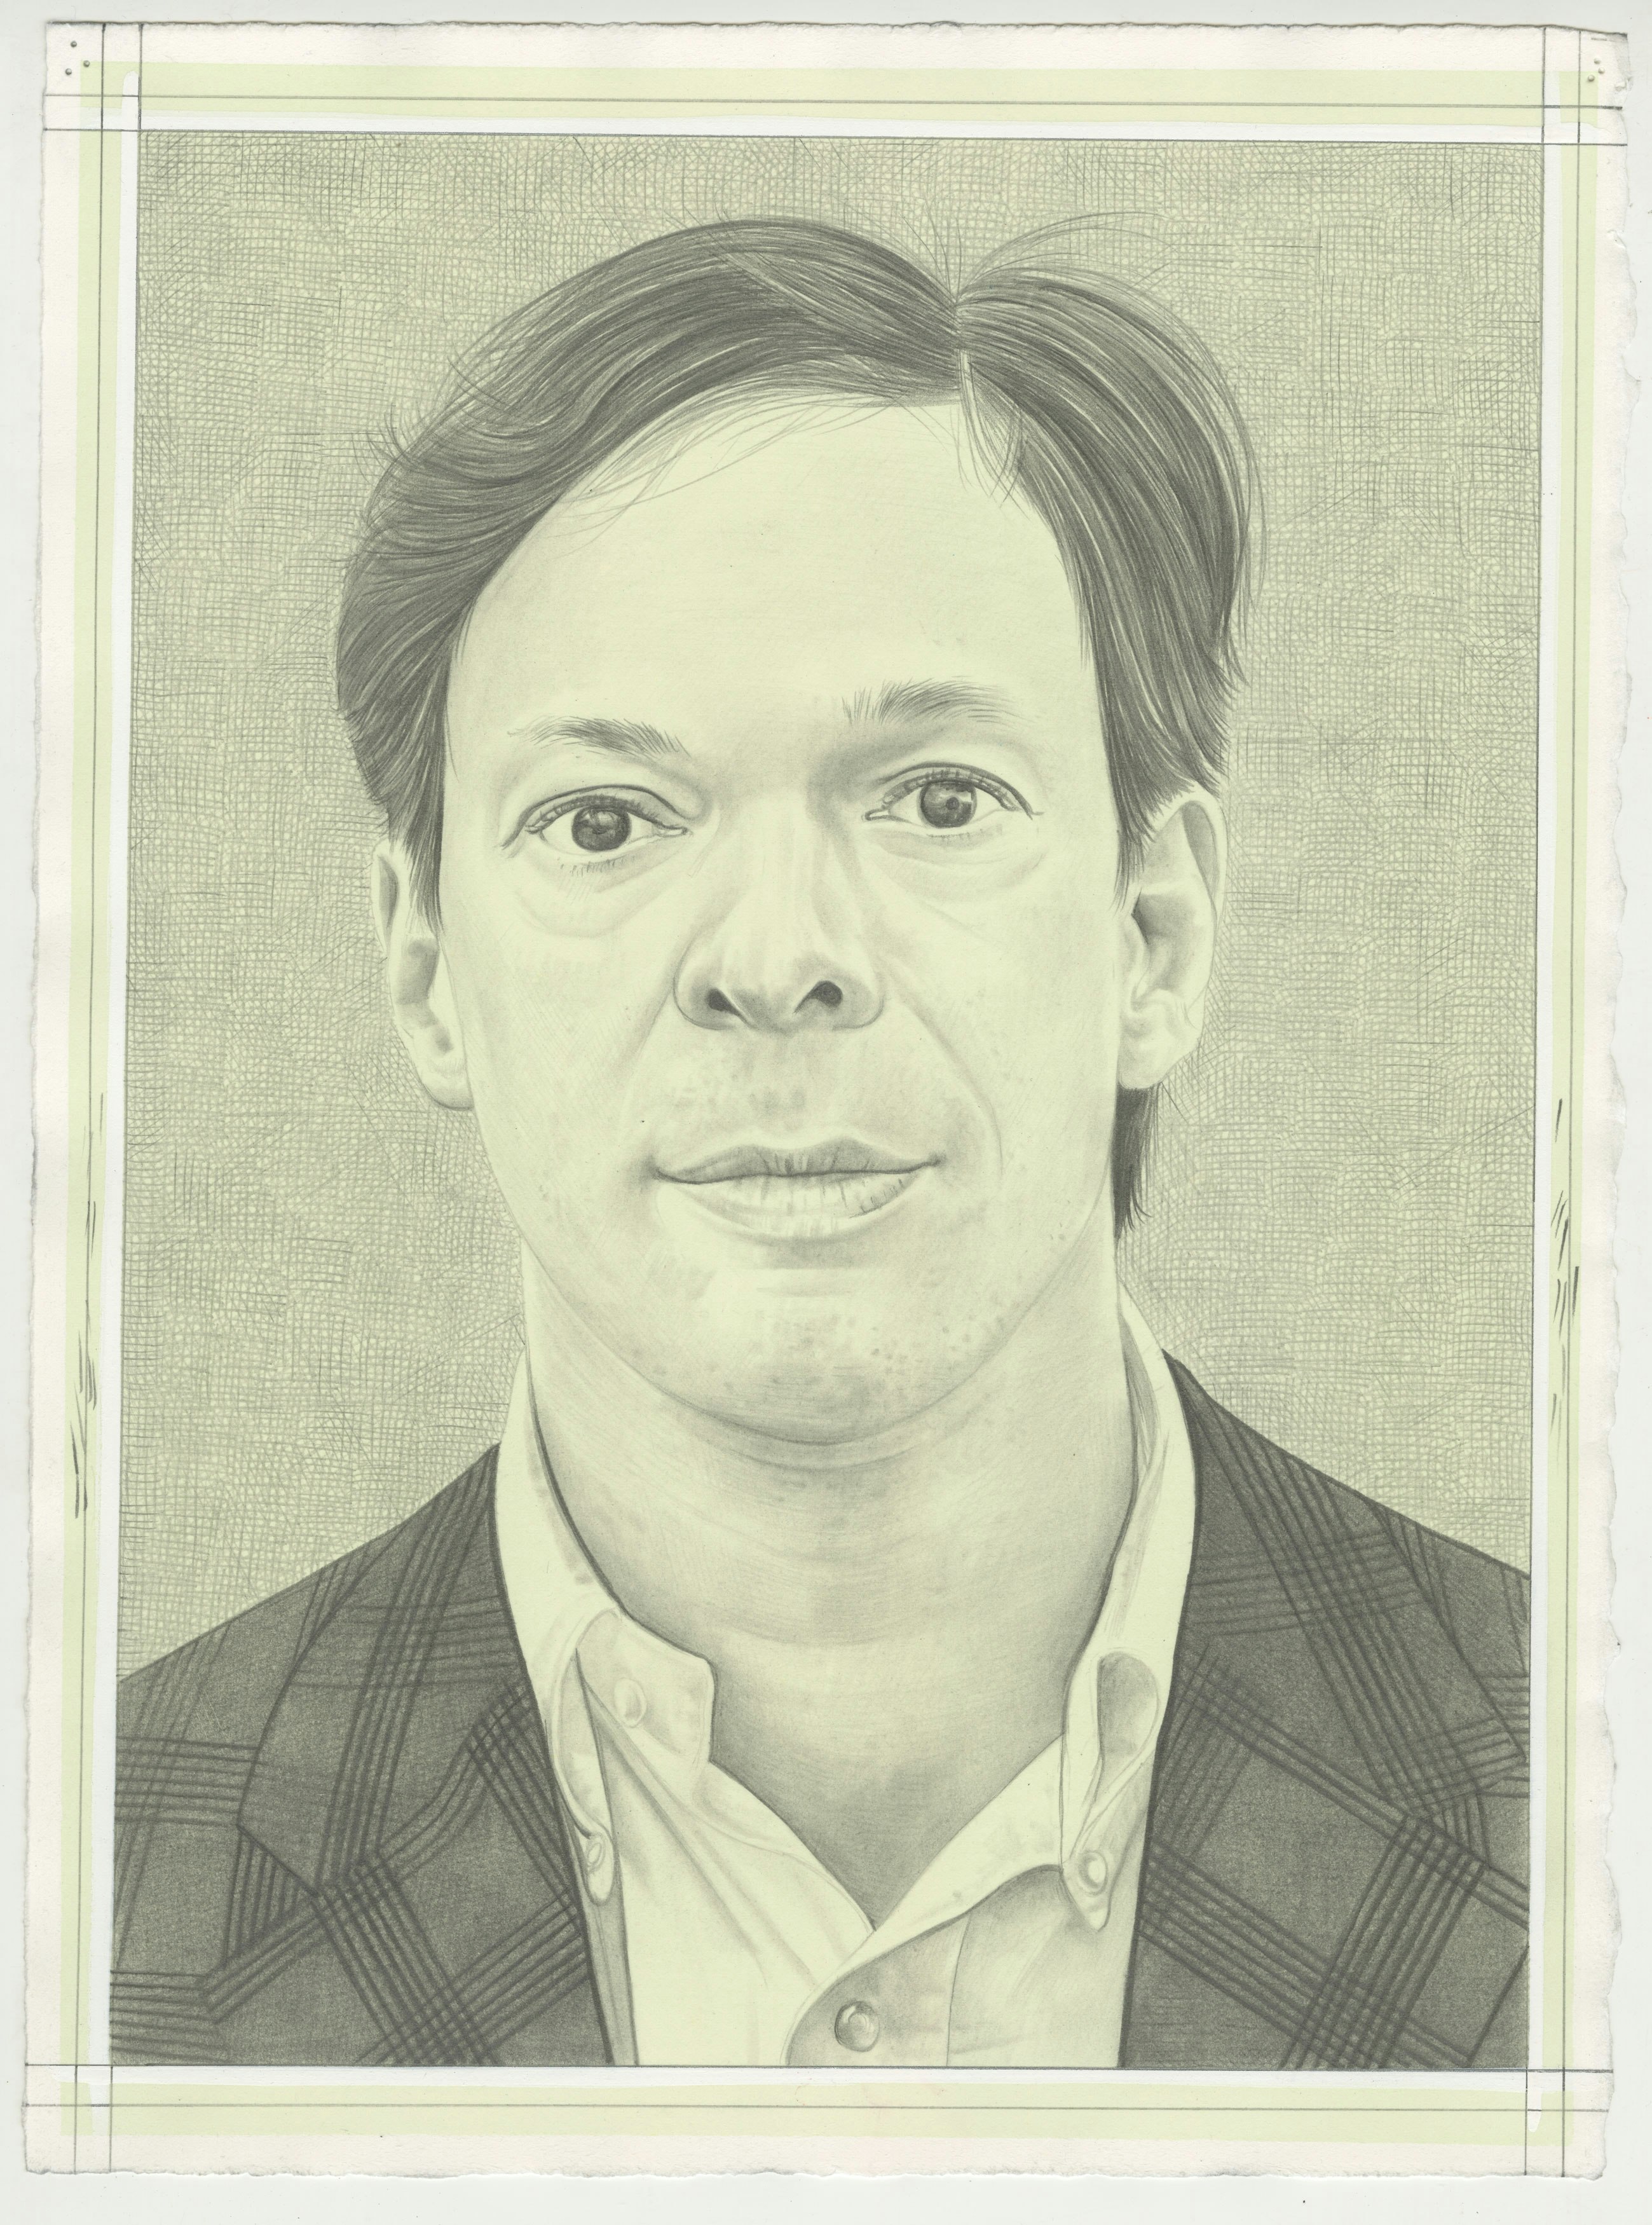 Portrait of Oliver Berggruen. Pencil on Paper by Phong H. Bui.